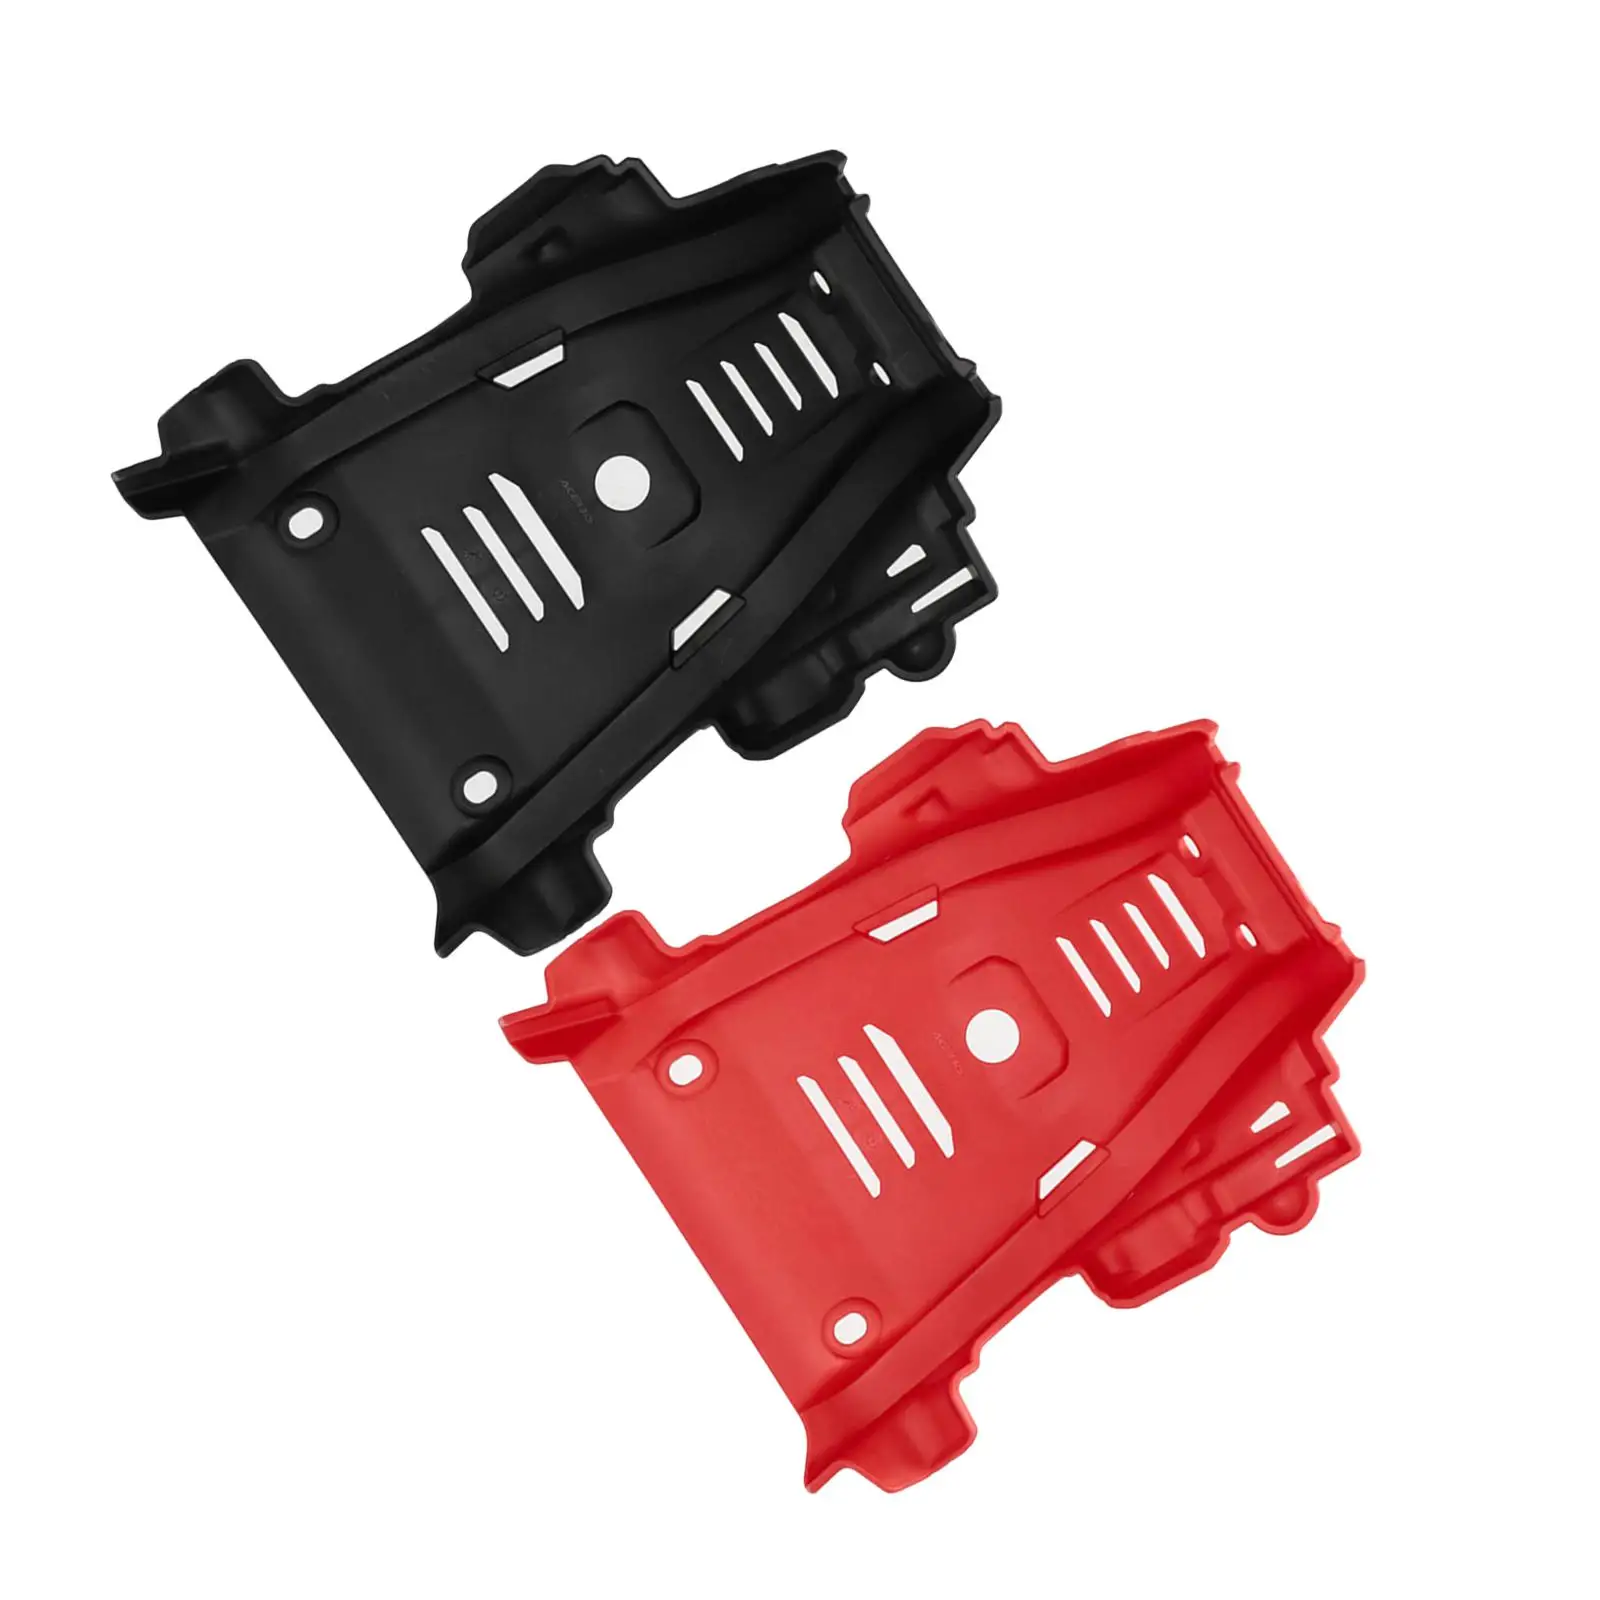  Engine Base Chassis Guard Plate Protective Cover for Crf300L